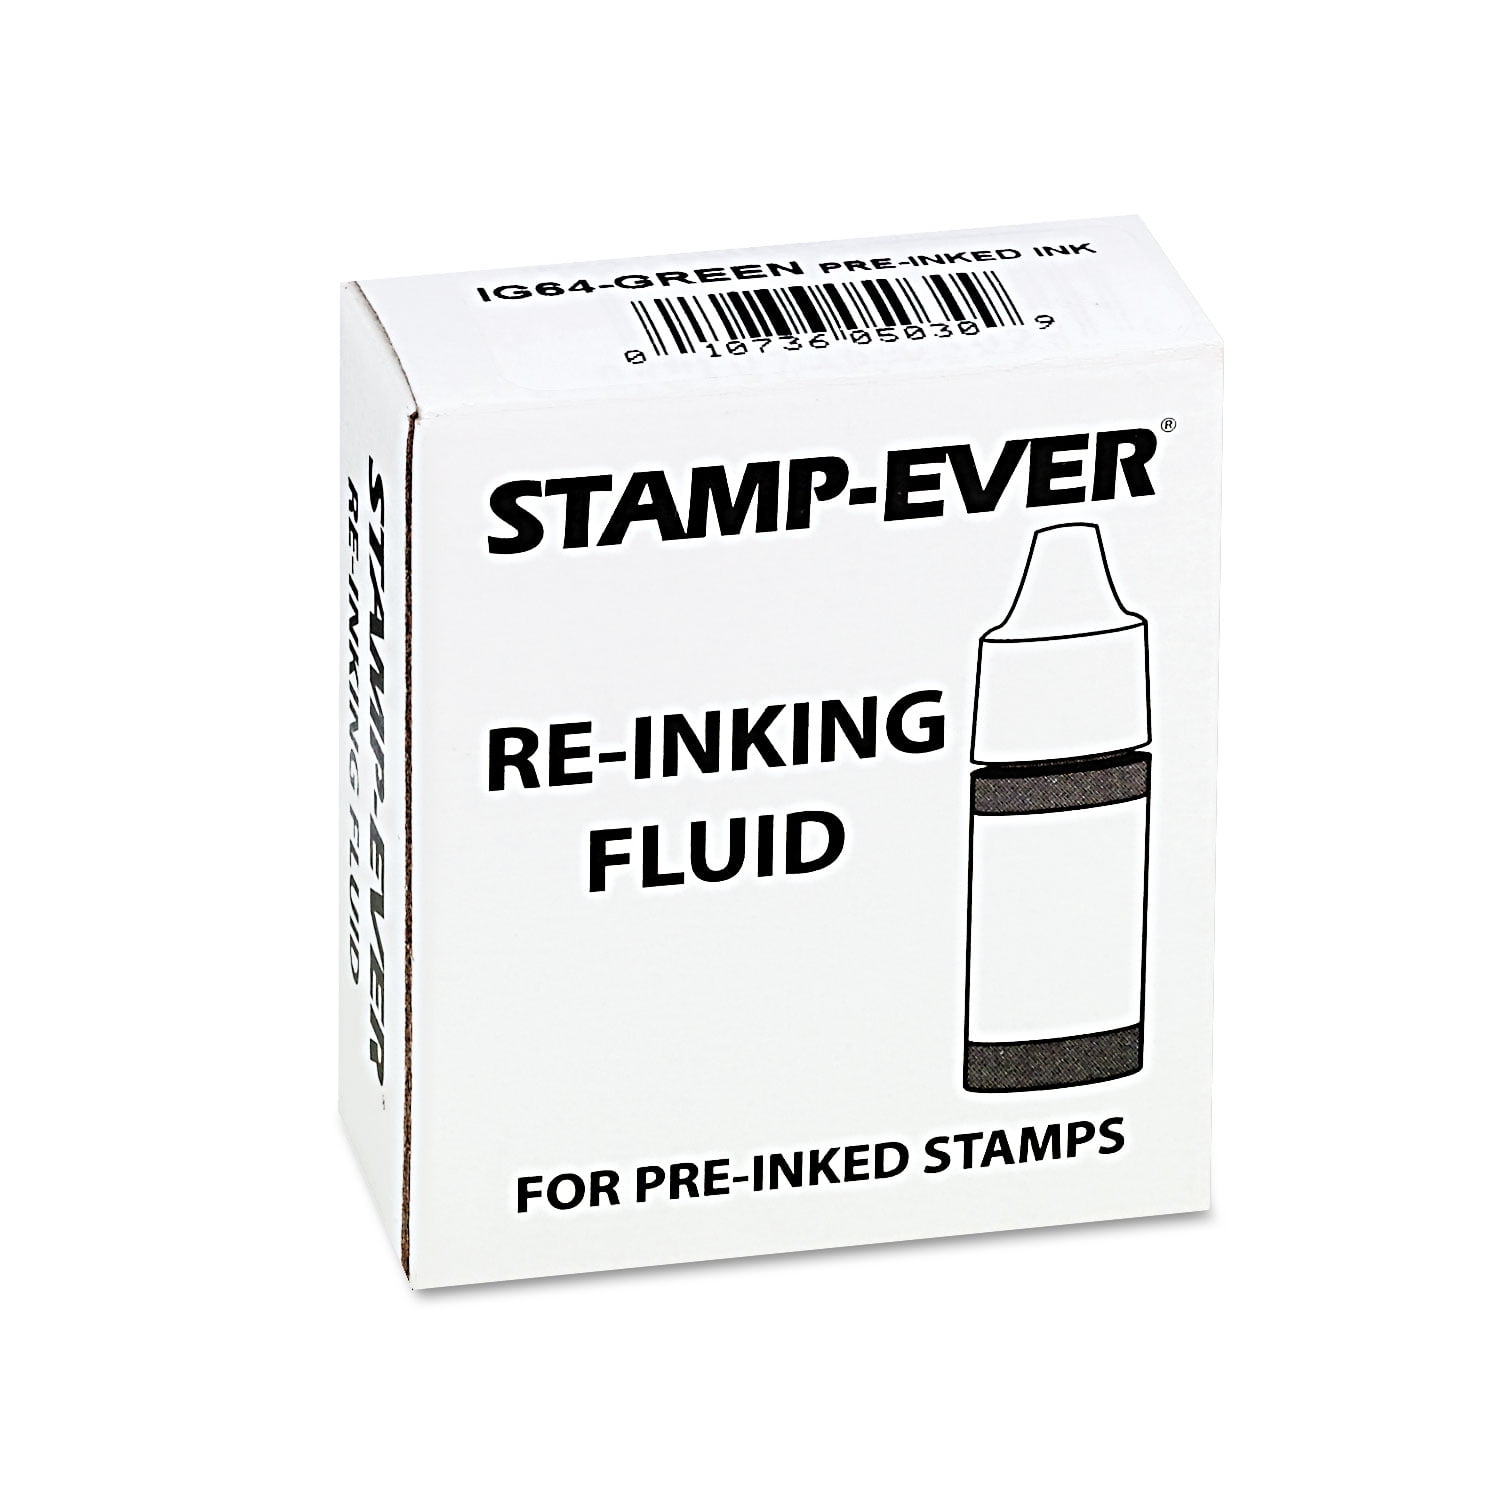 How To Refill Pre-Inked Stamps –